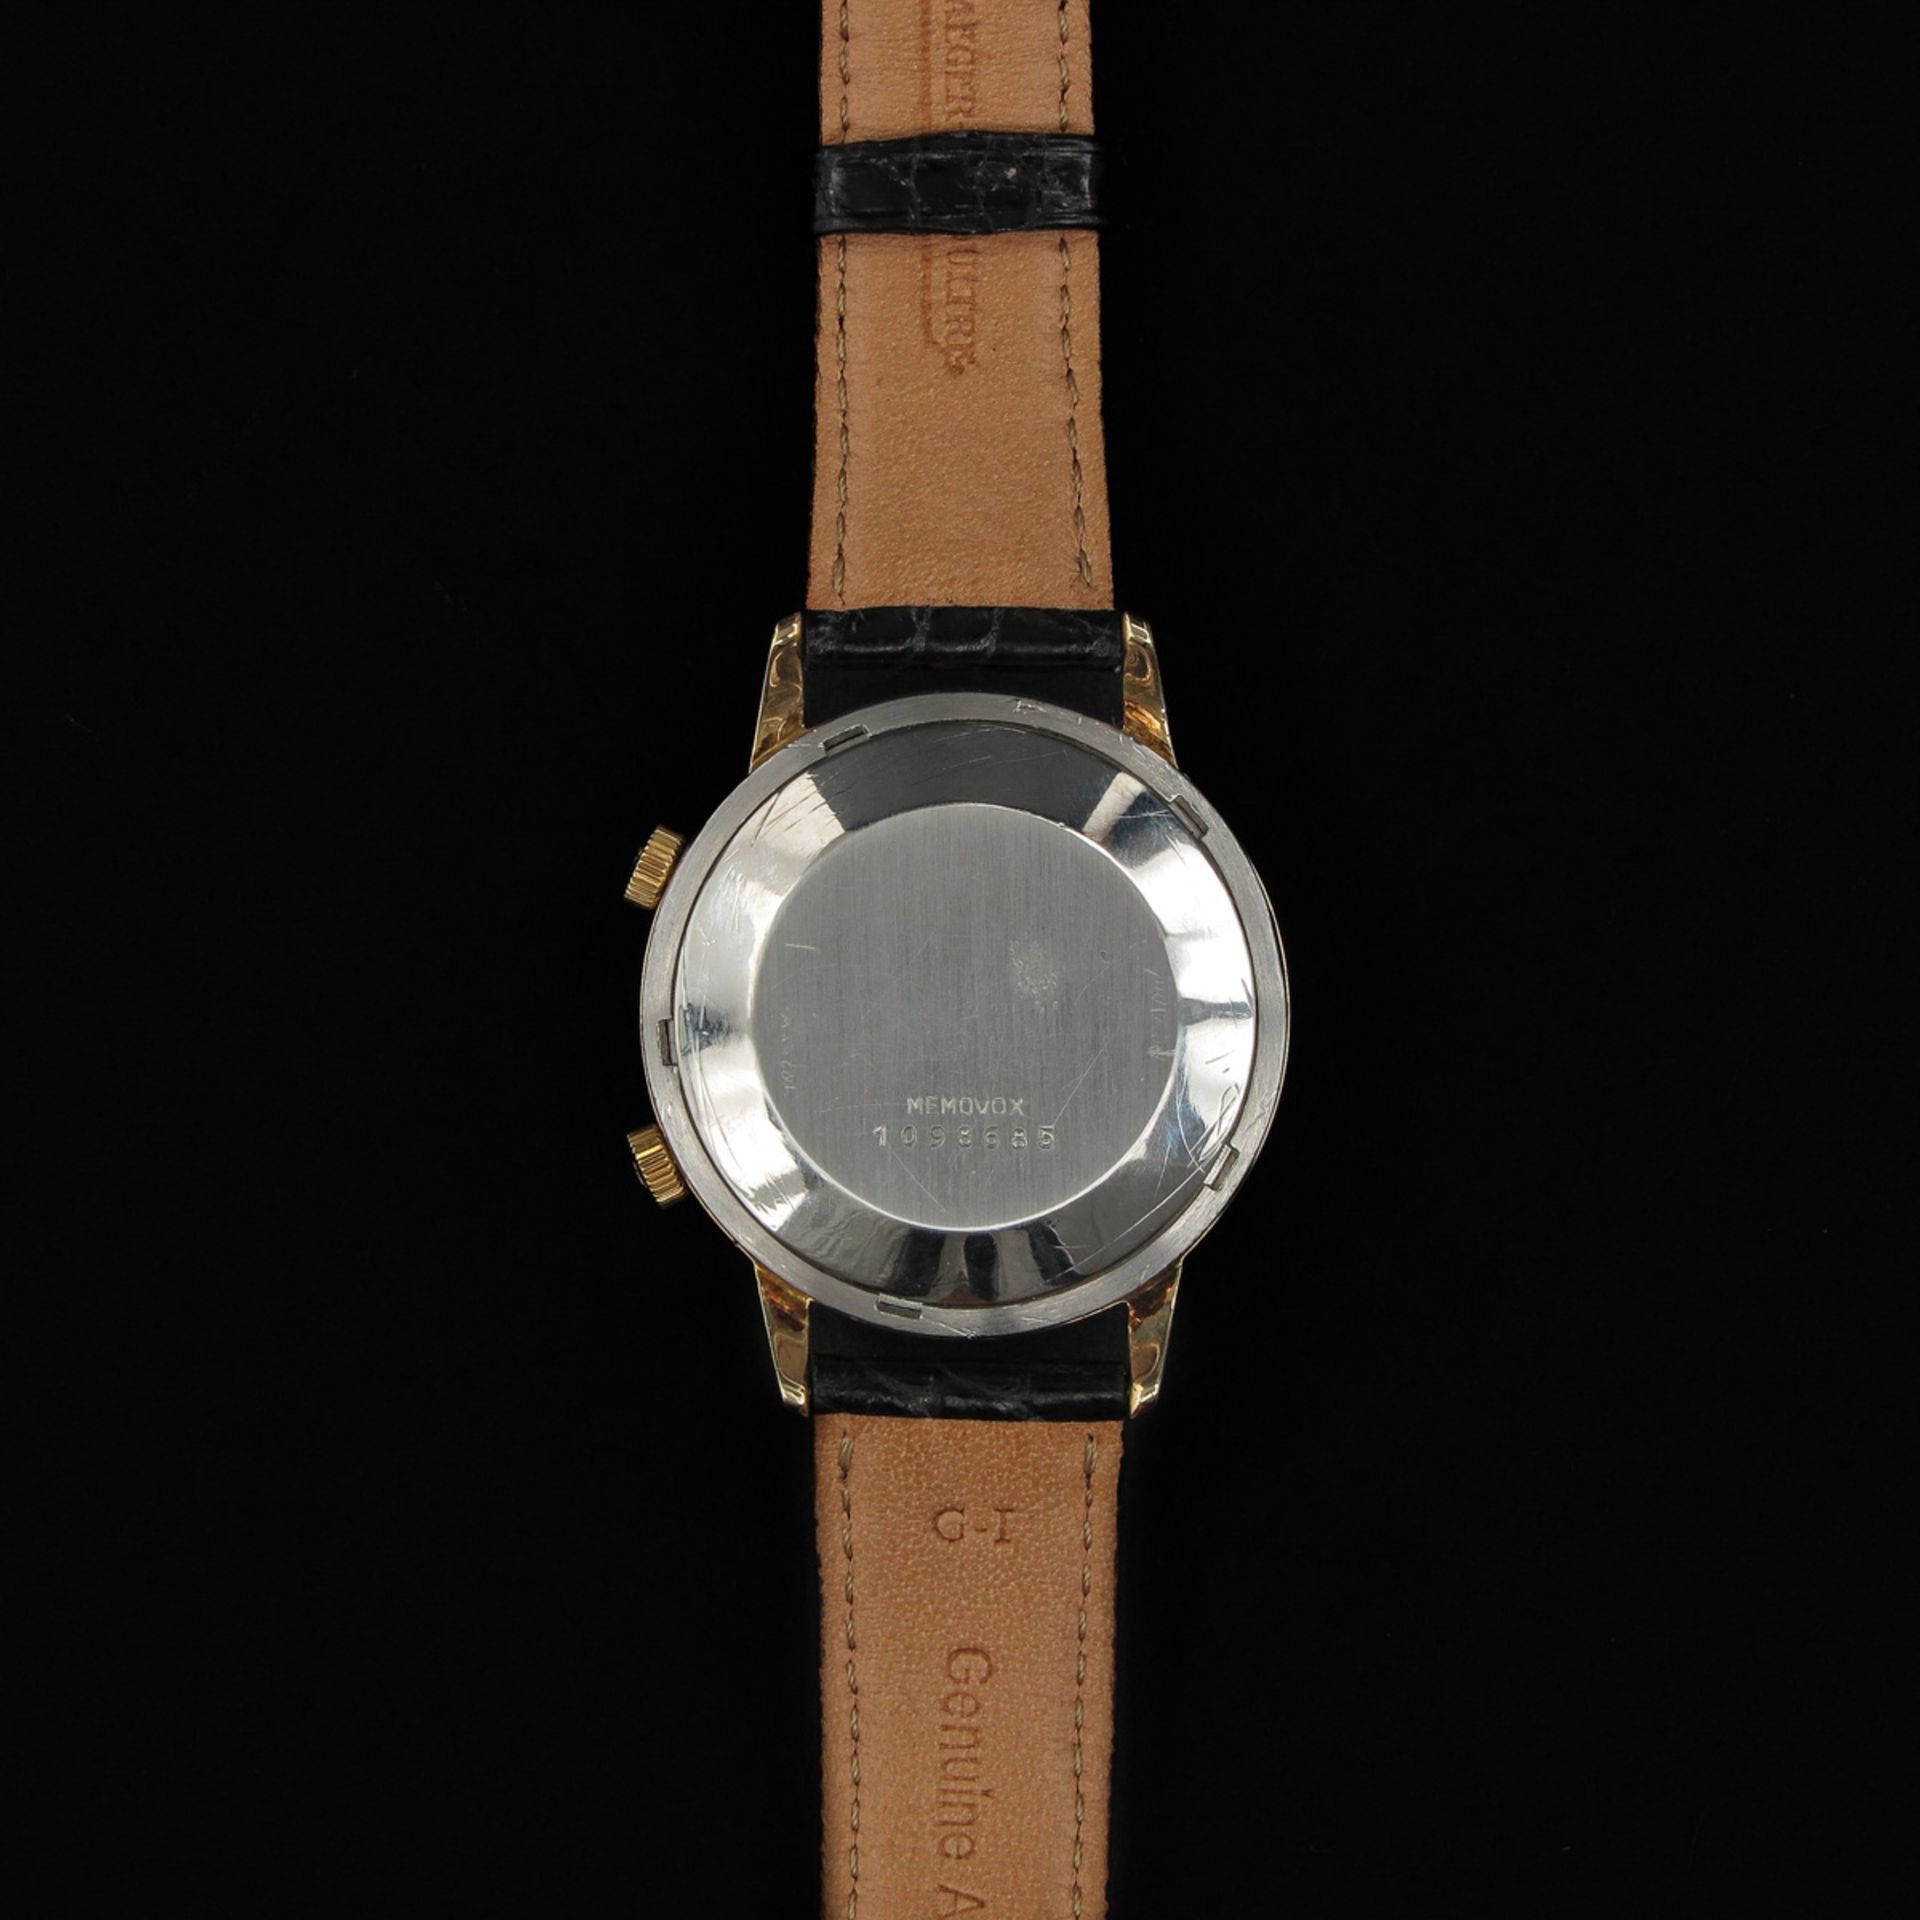 A Mens Jaeger-LeCoultre Watch - Image 4 of 10